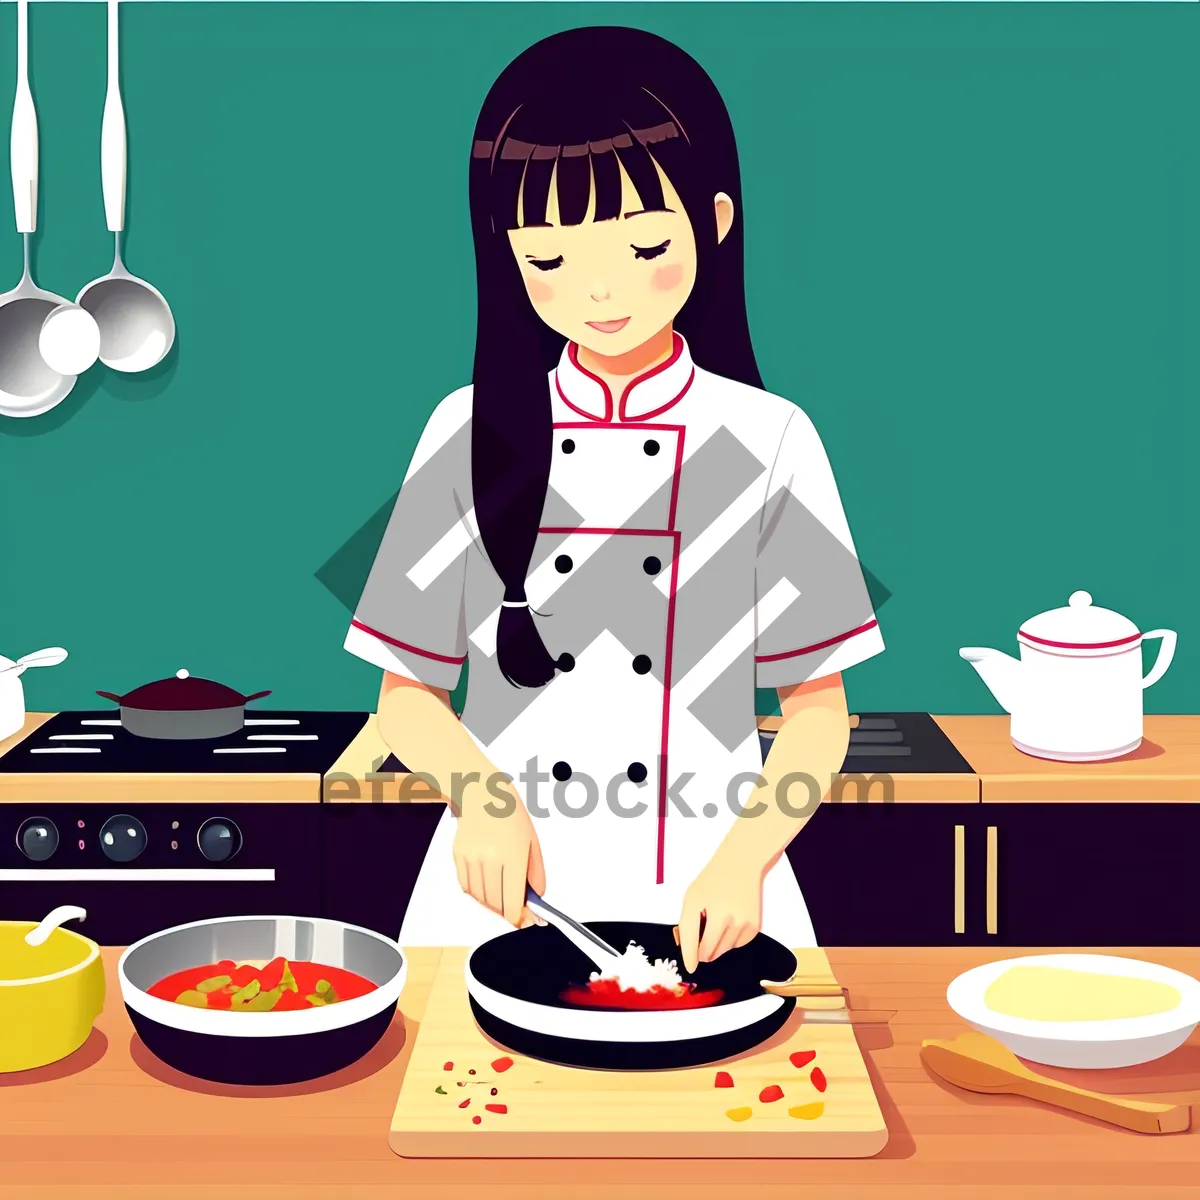 Picture of A Cheerful Cartoon Girl Chef Prepares Food With a Joyful Expression on her Face